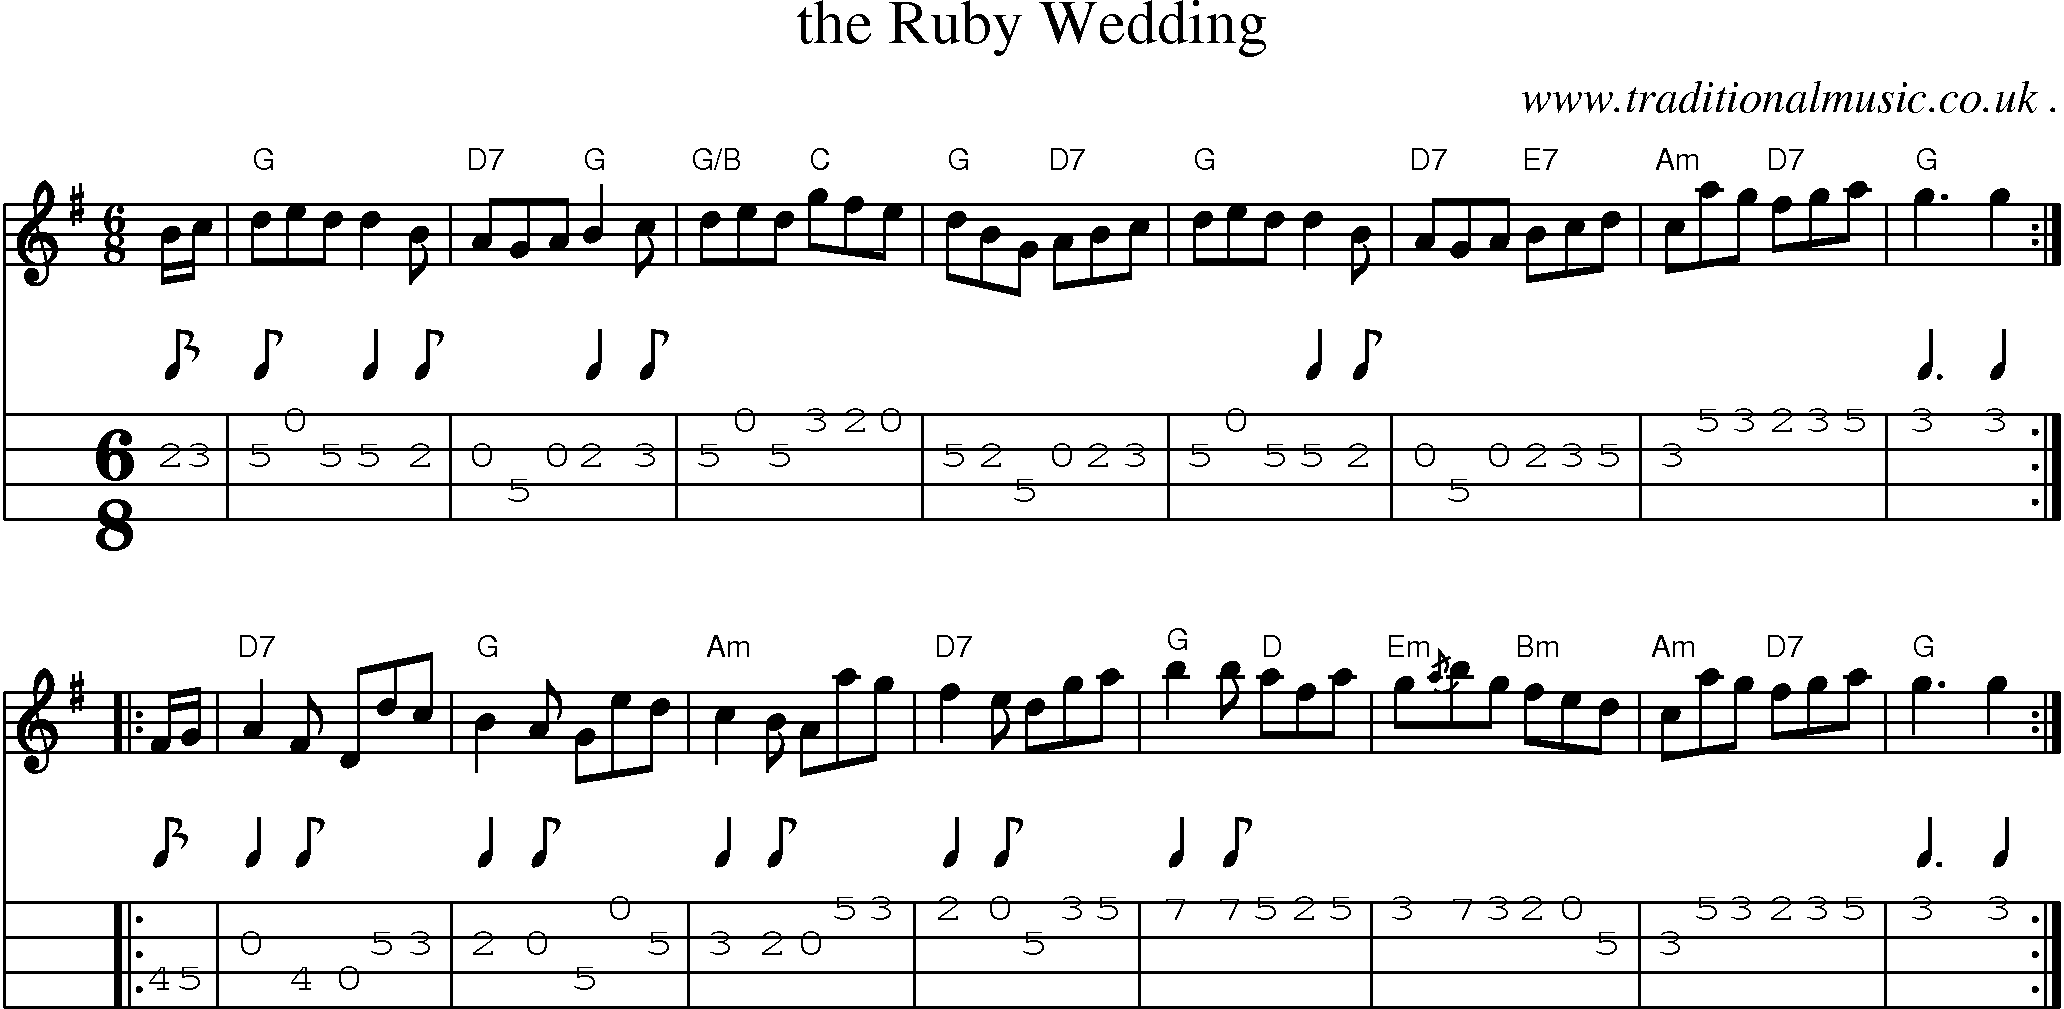 Sheet-music  score, Chords and Mandolin Tabs for The Ruby Wedding